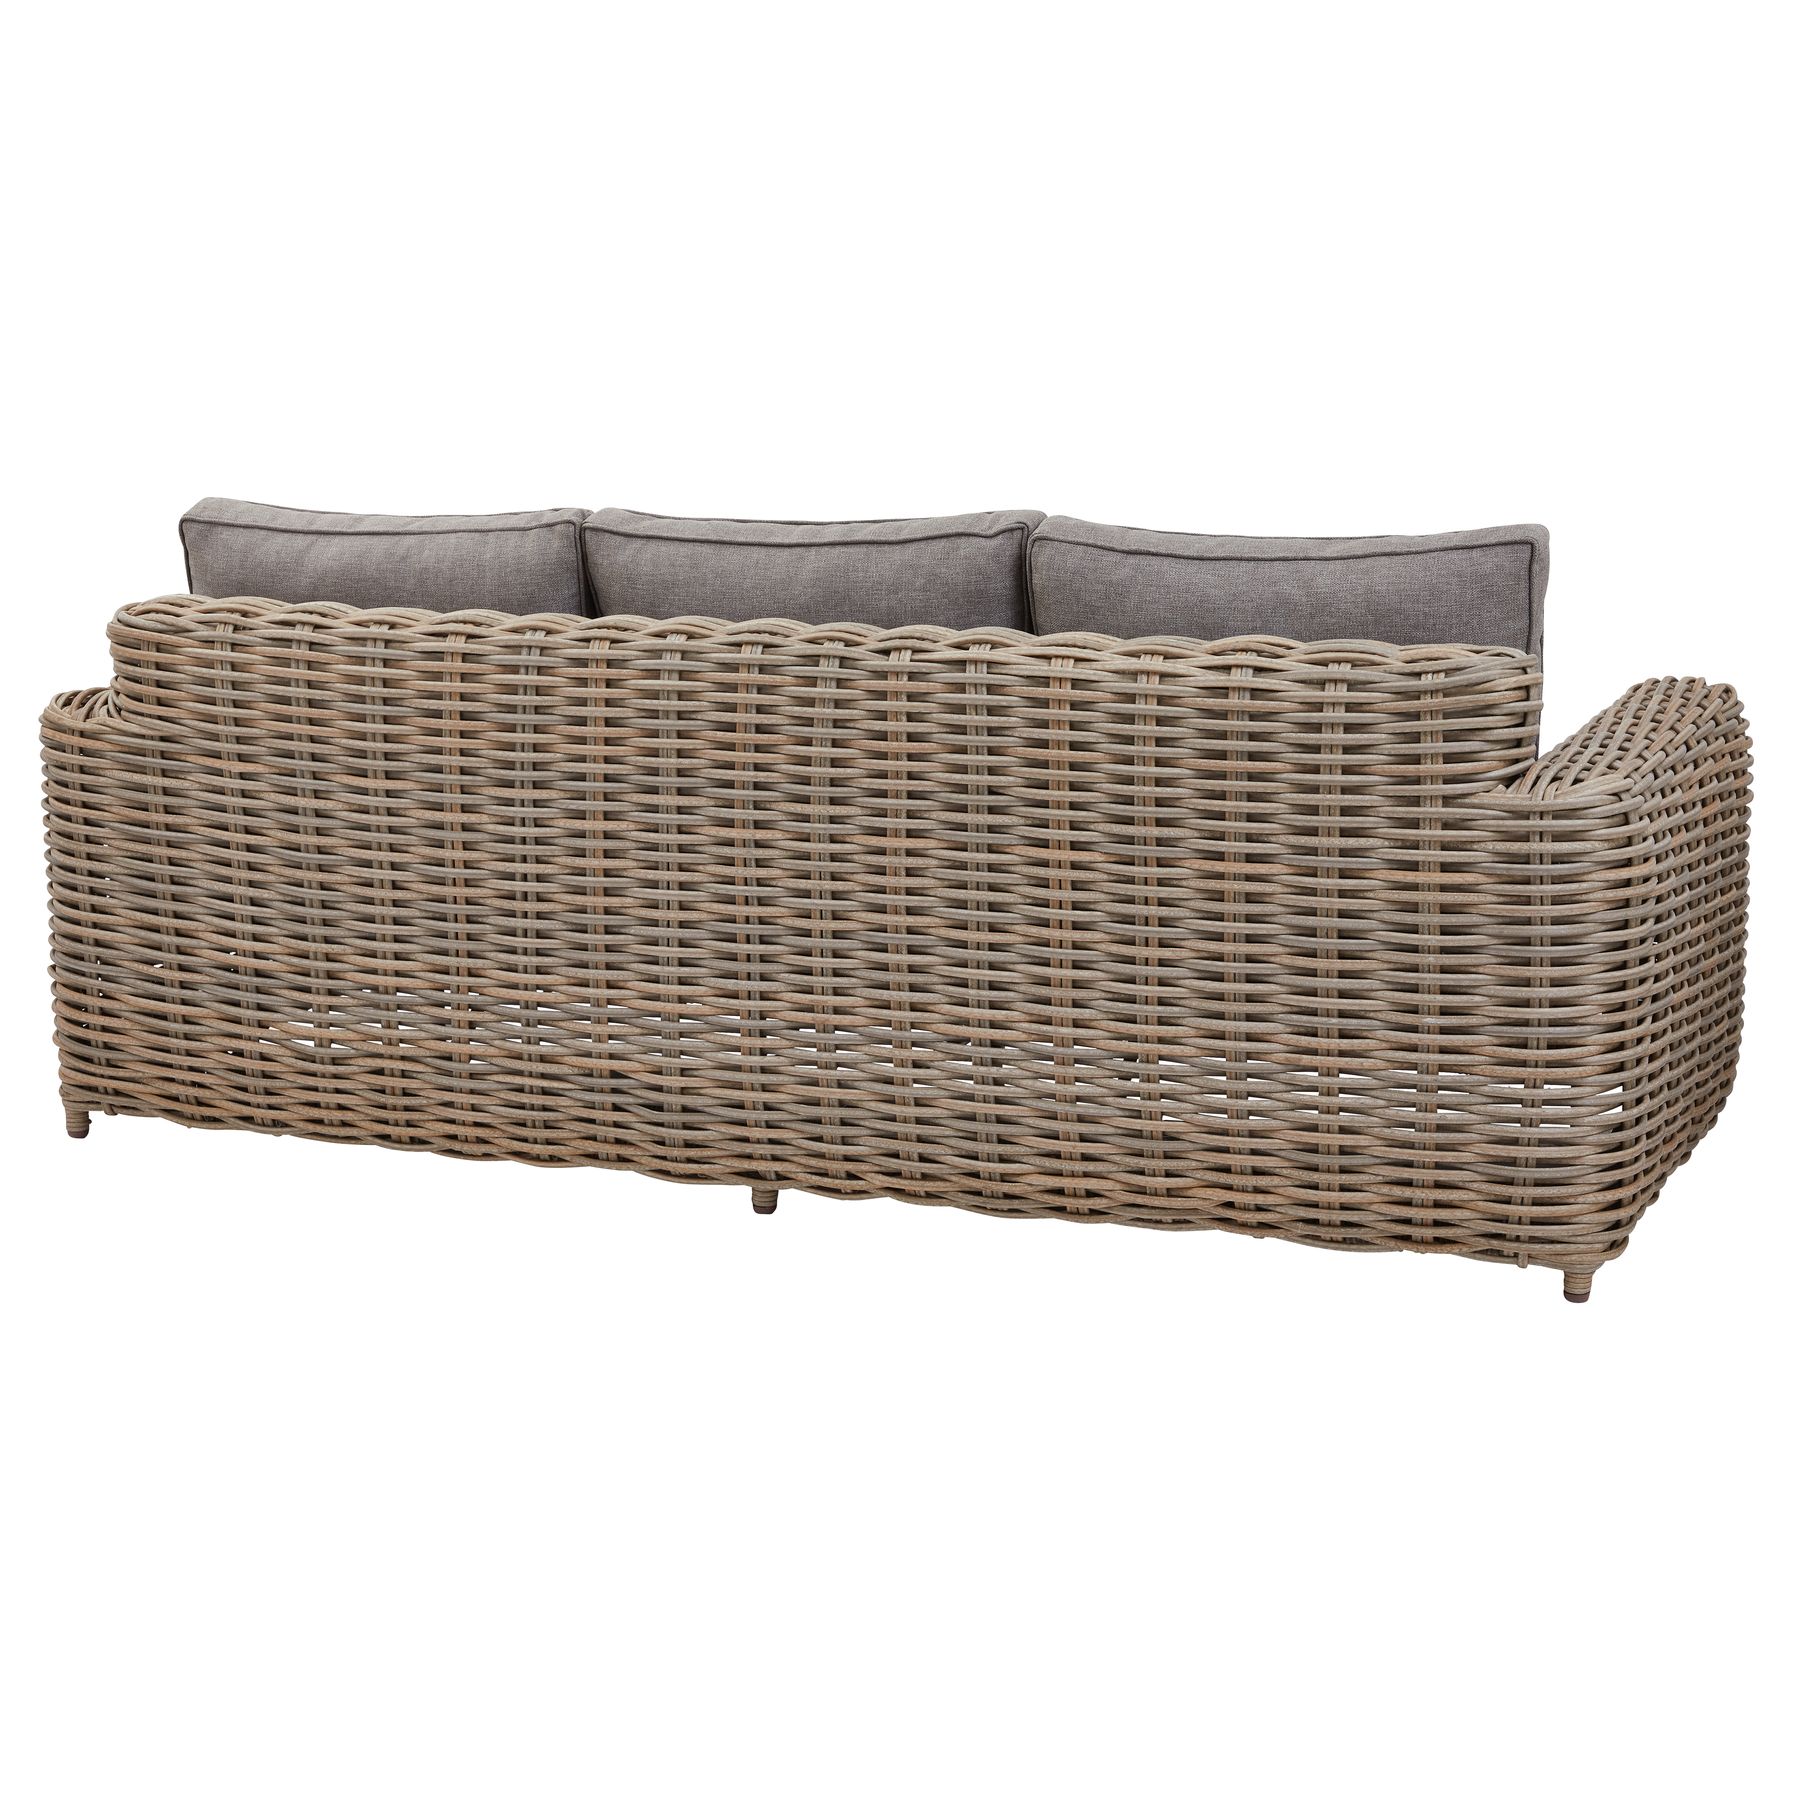 Amalfi Collection Outdoor Five Seater Set - Image 5